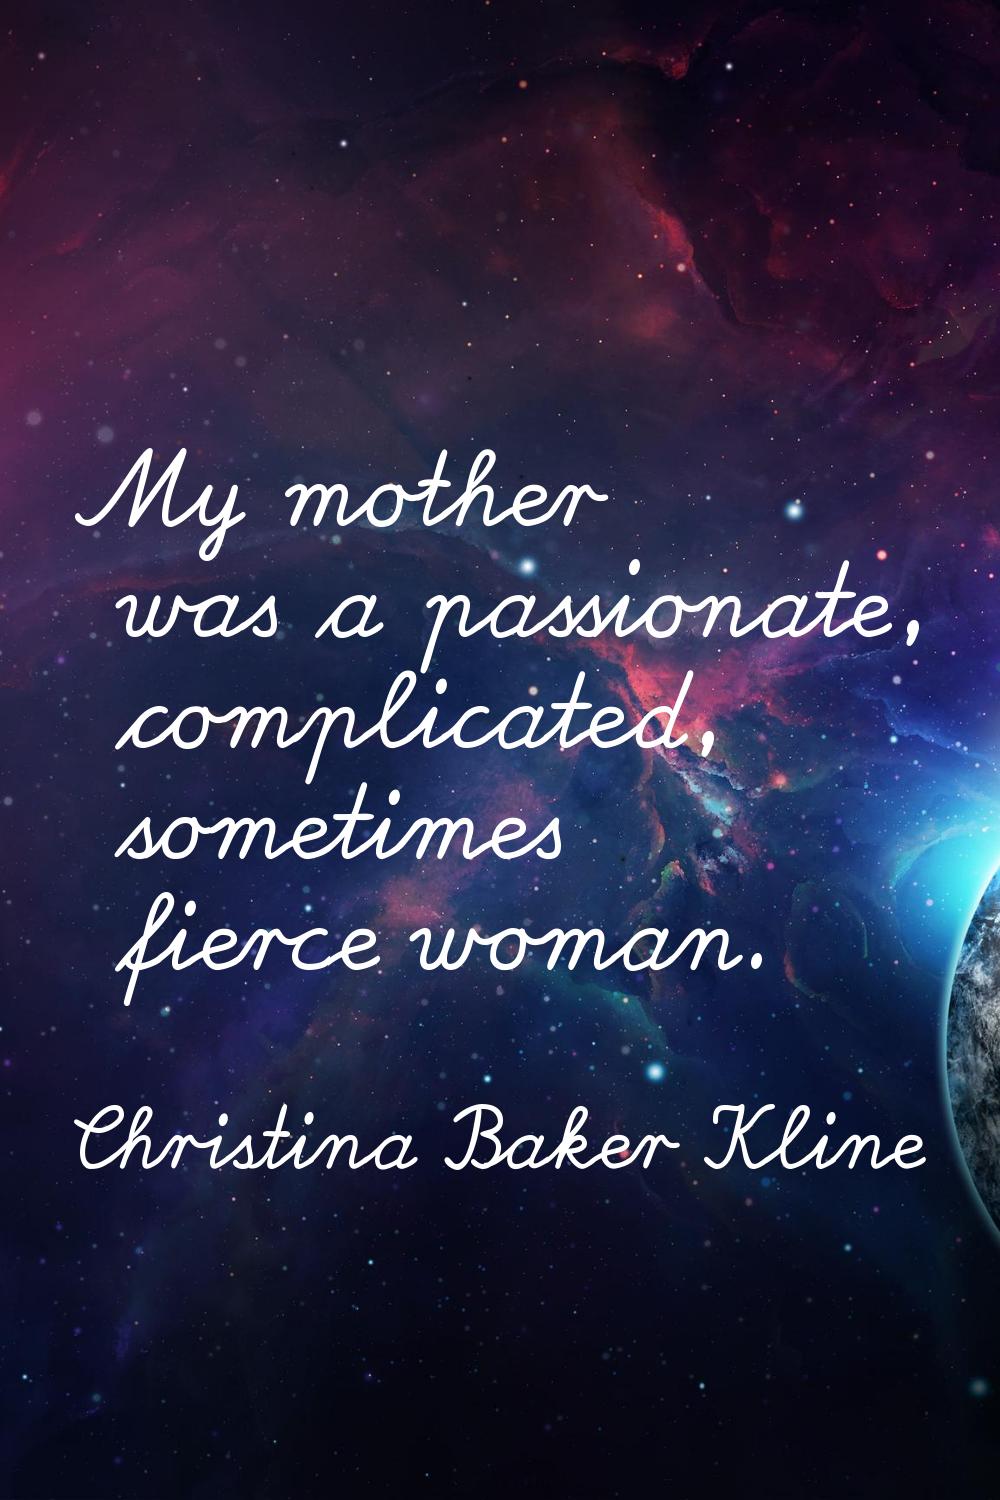 My mother was a passionate, complicated, sometimes fierce woman.